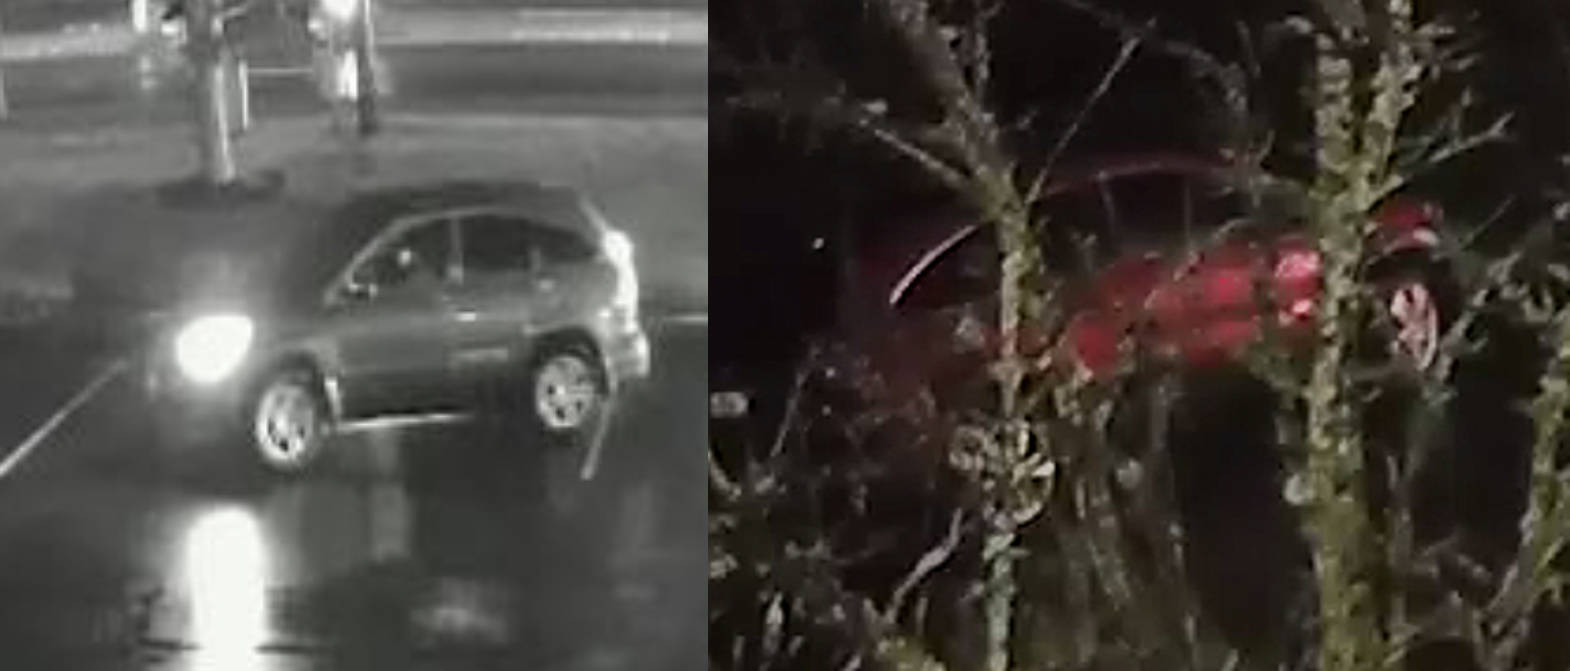 M’ville Police seek public’s help to ID possible witnesses to fatal hit and run